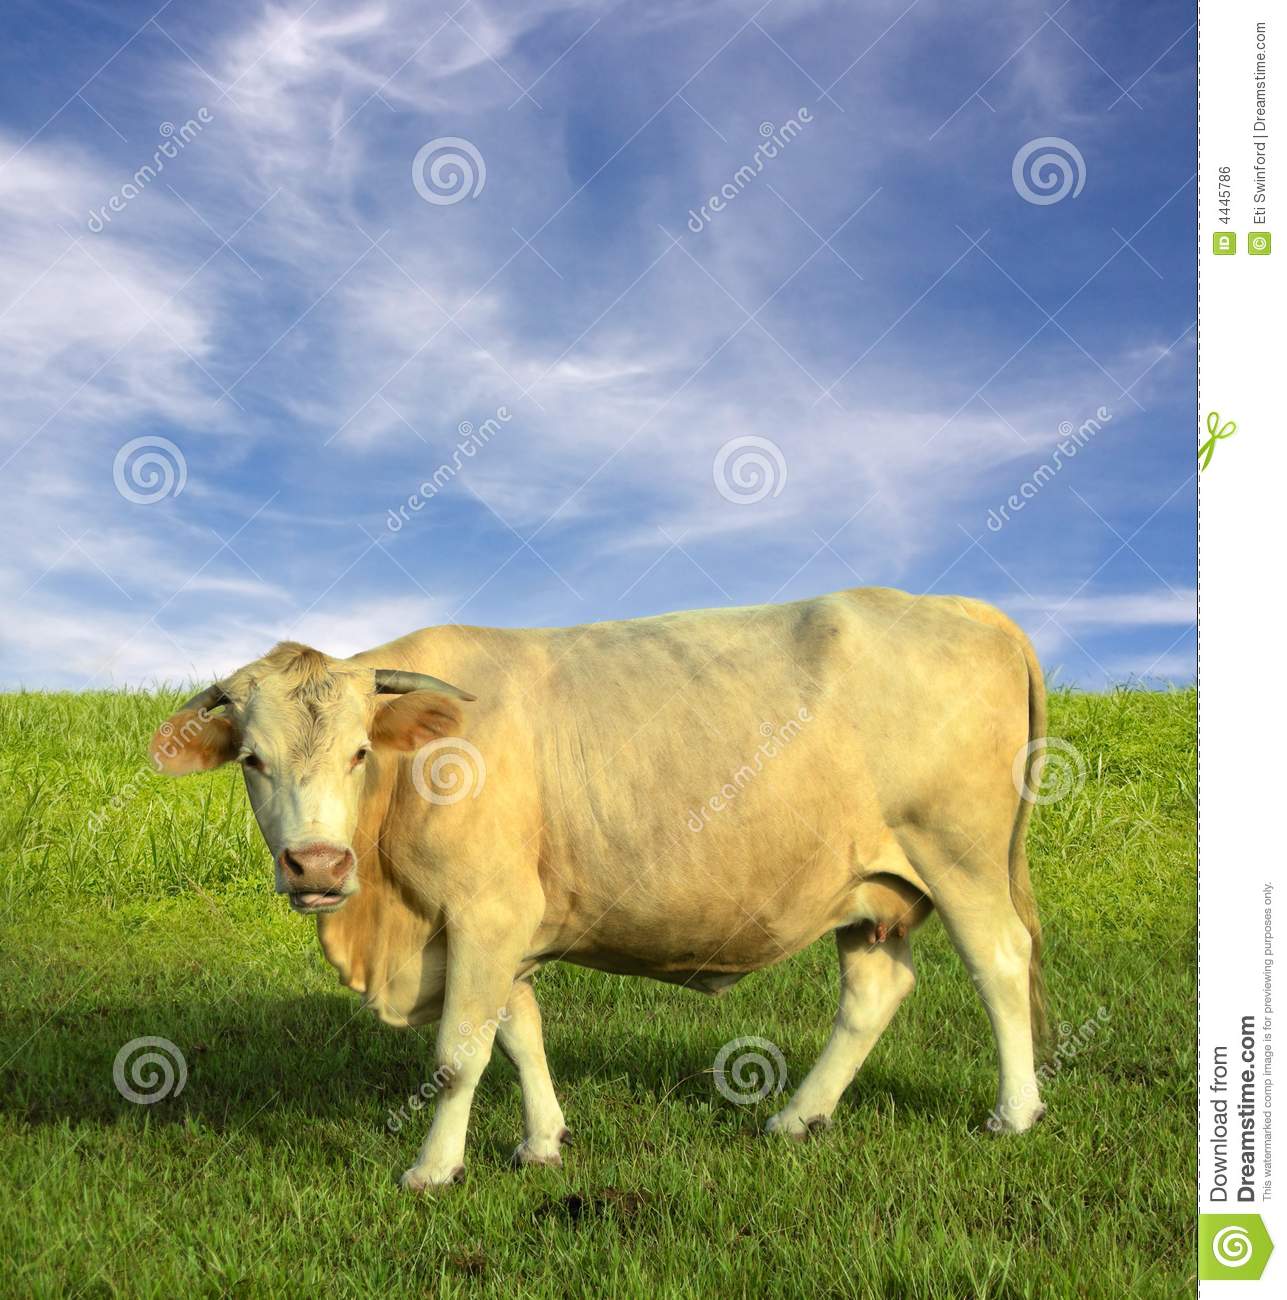 Cow With Horns Stands In A Grassy Field With A Wispy Cloudy Sky